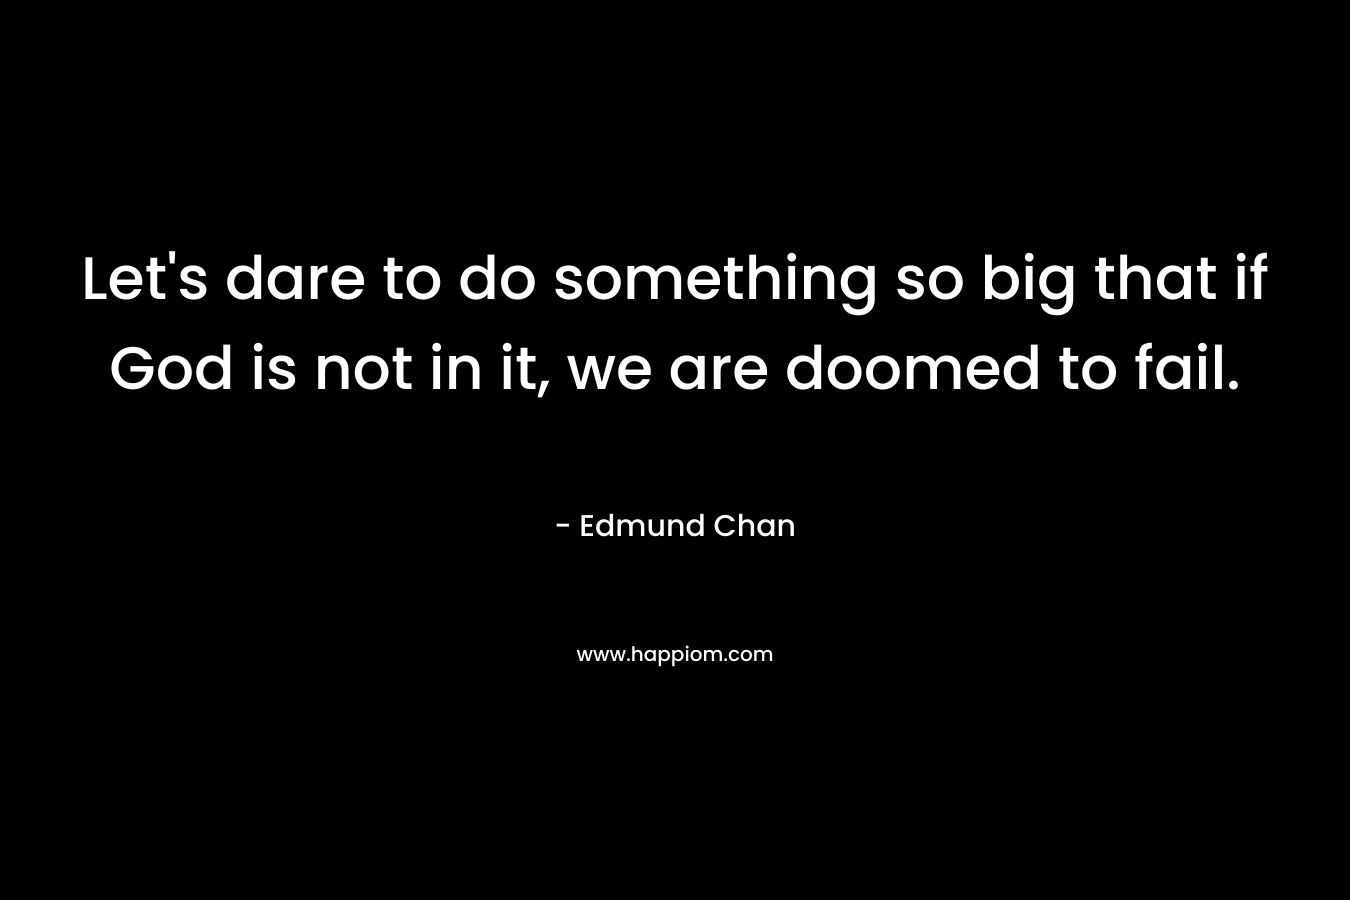 Let’s dare to do something so big that if God is not in it, we are doomed to fail. – Edmund Chan